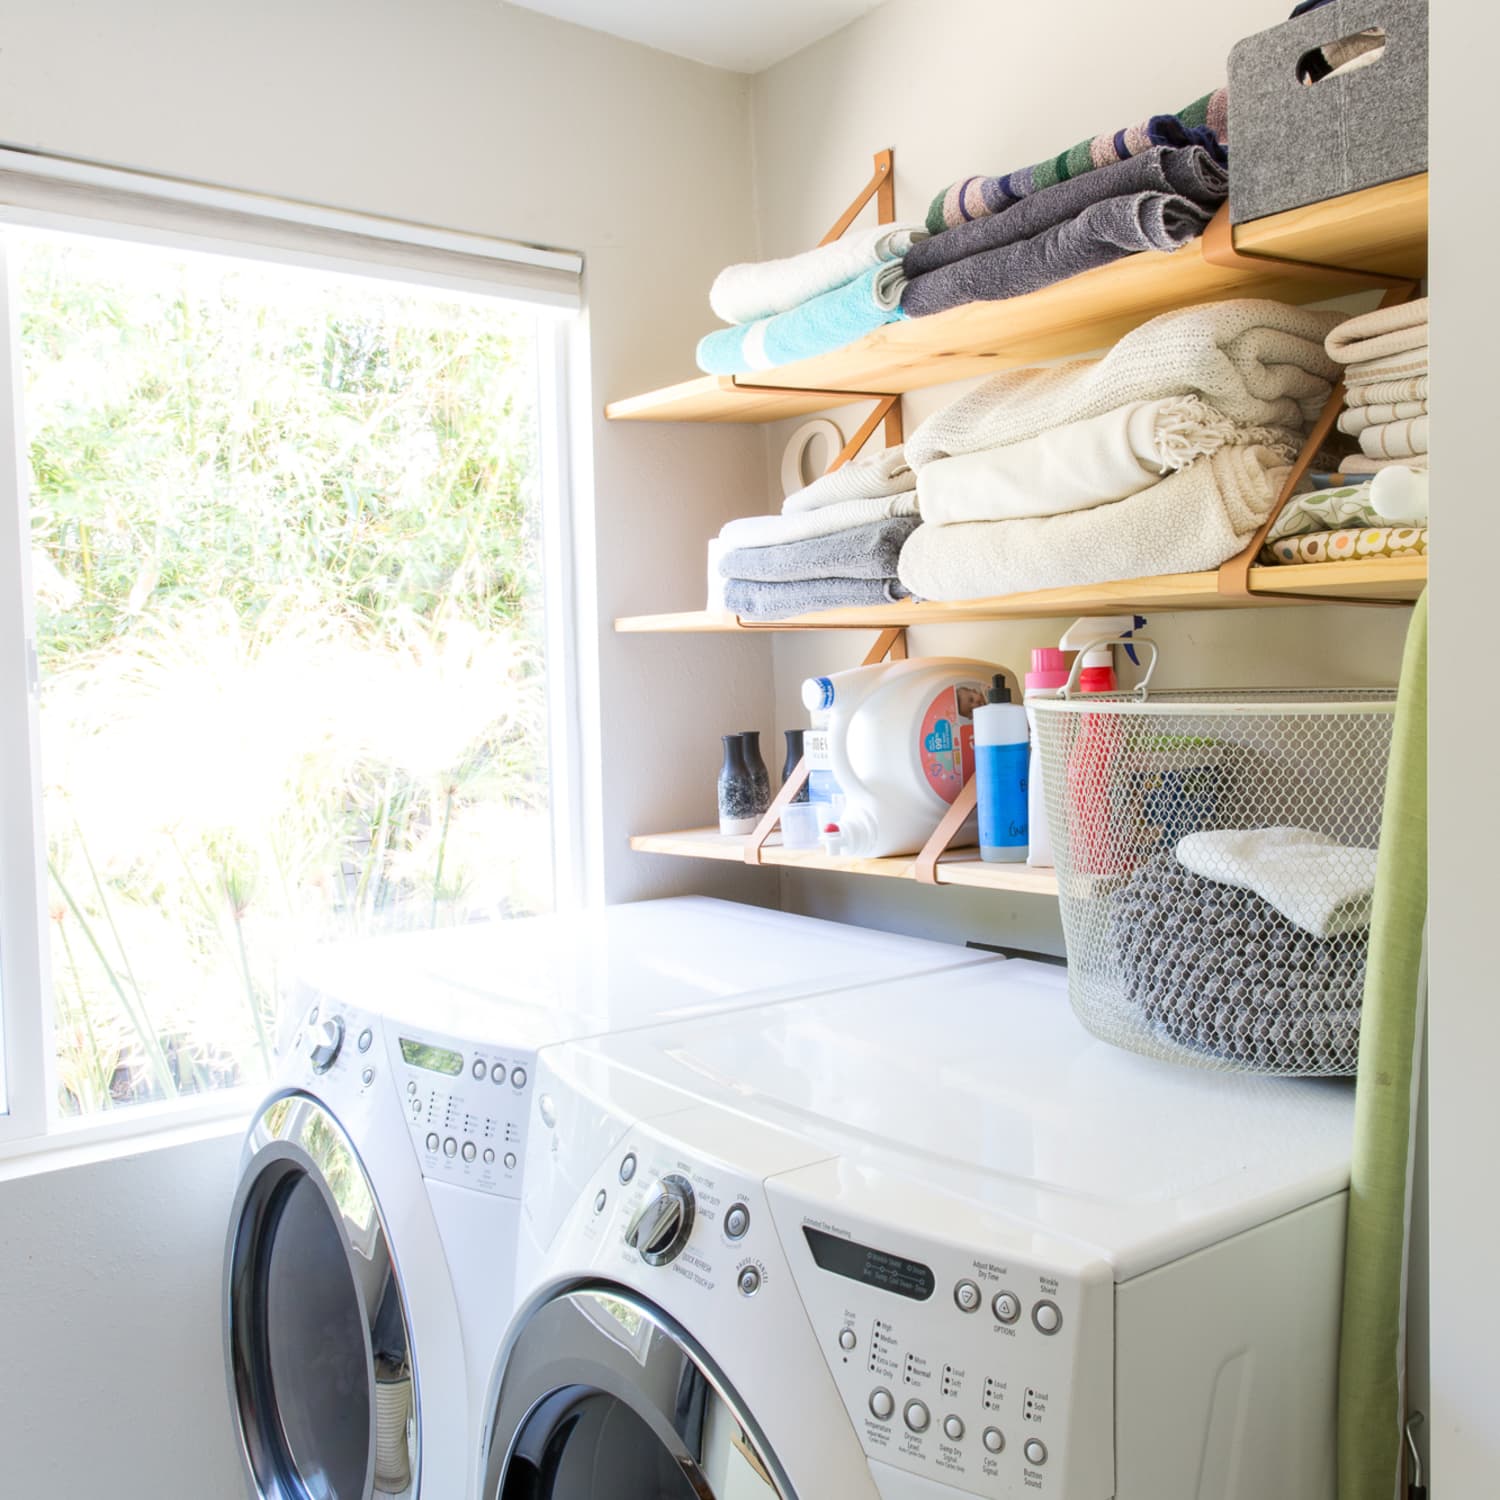 How to Do Laundry on Vacation  8 Simple Vacation Laundry Tips